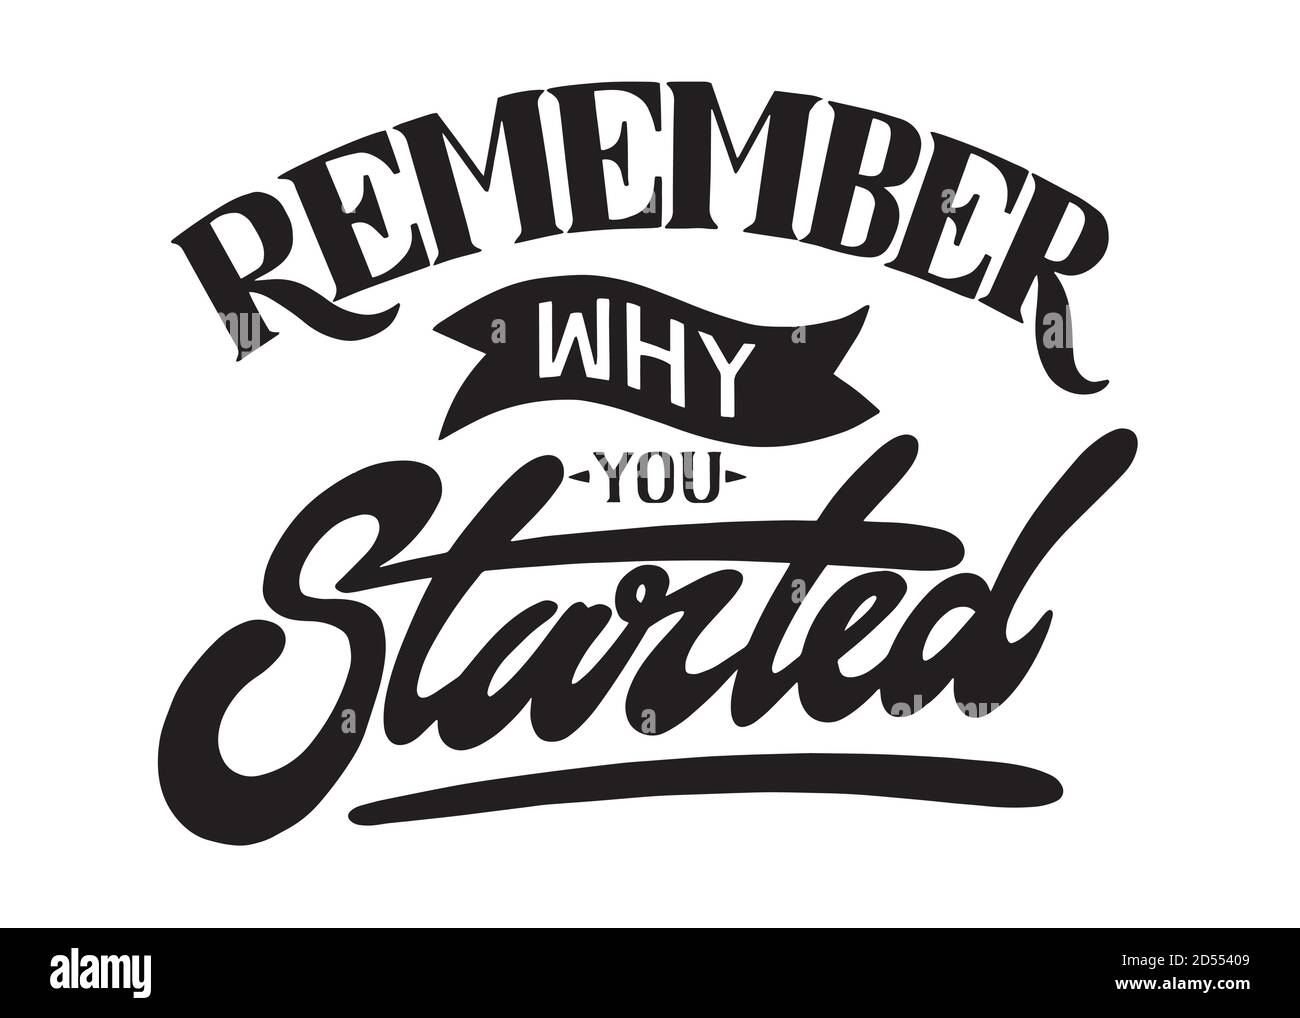 Remember why you started. Hand lettering art. Brush style letters on ...